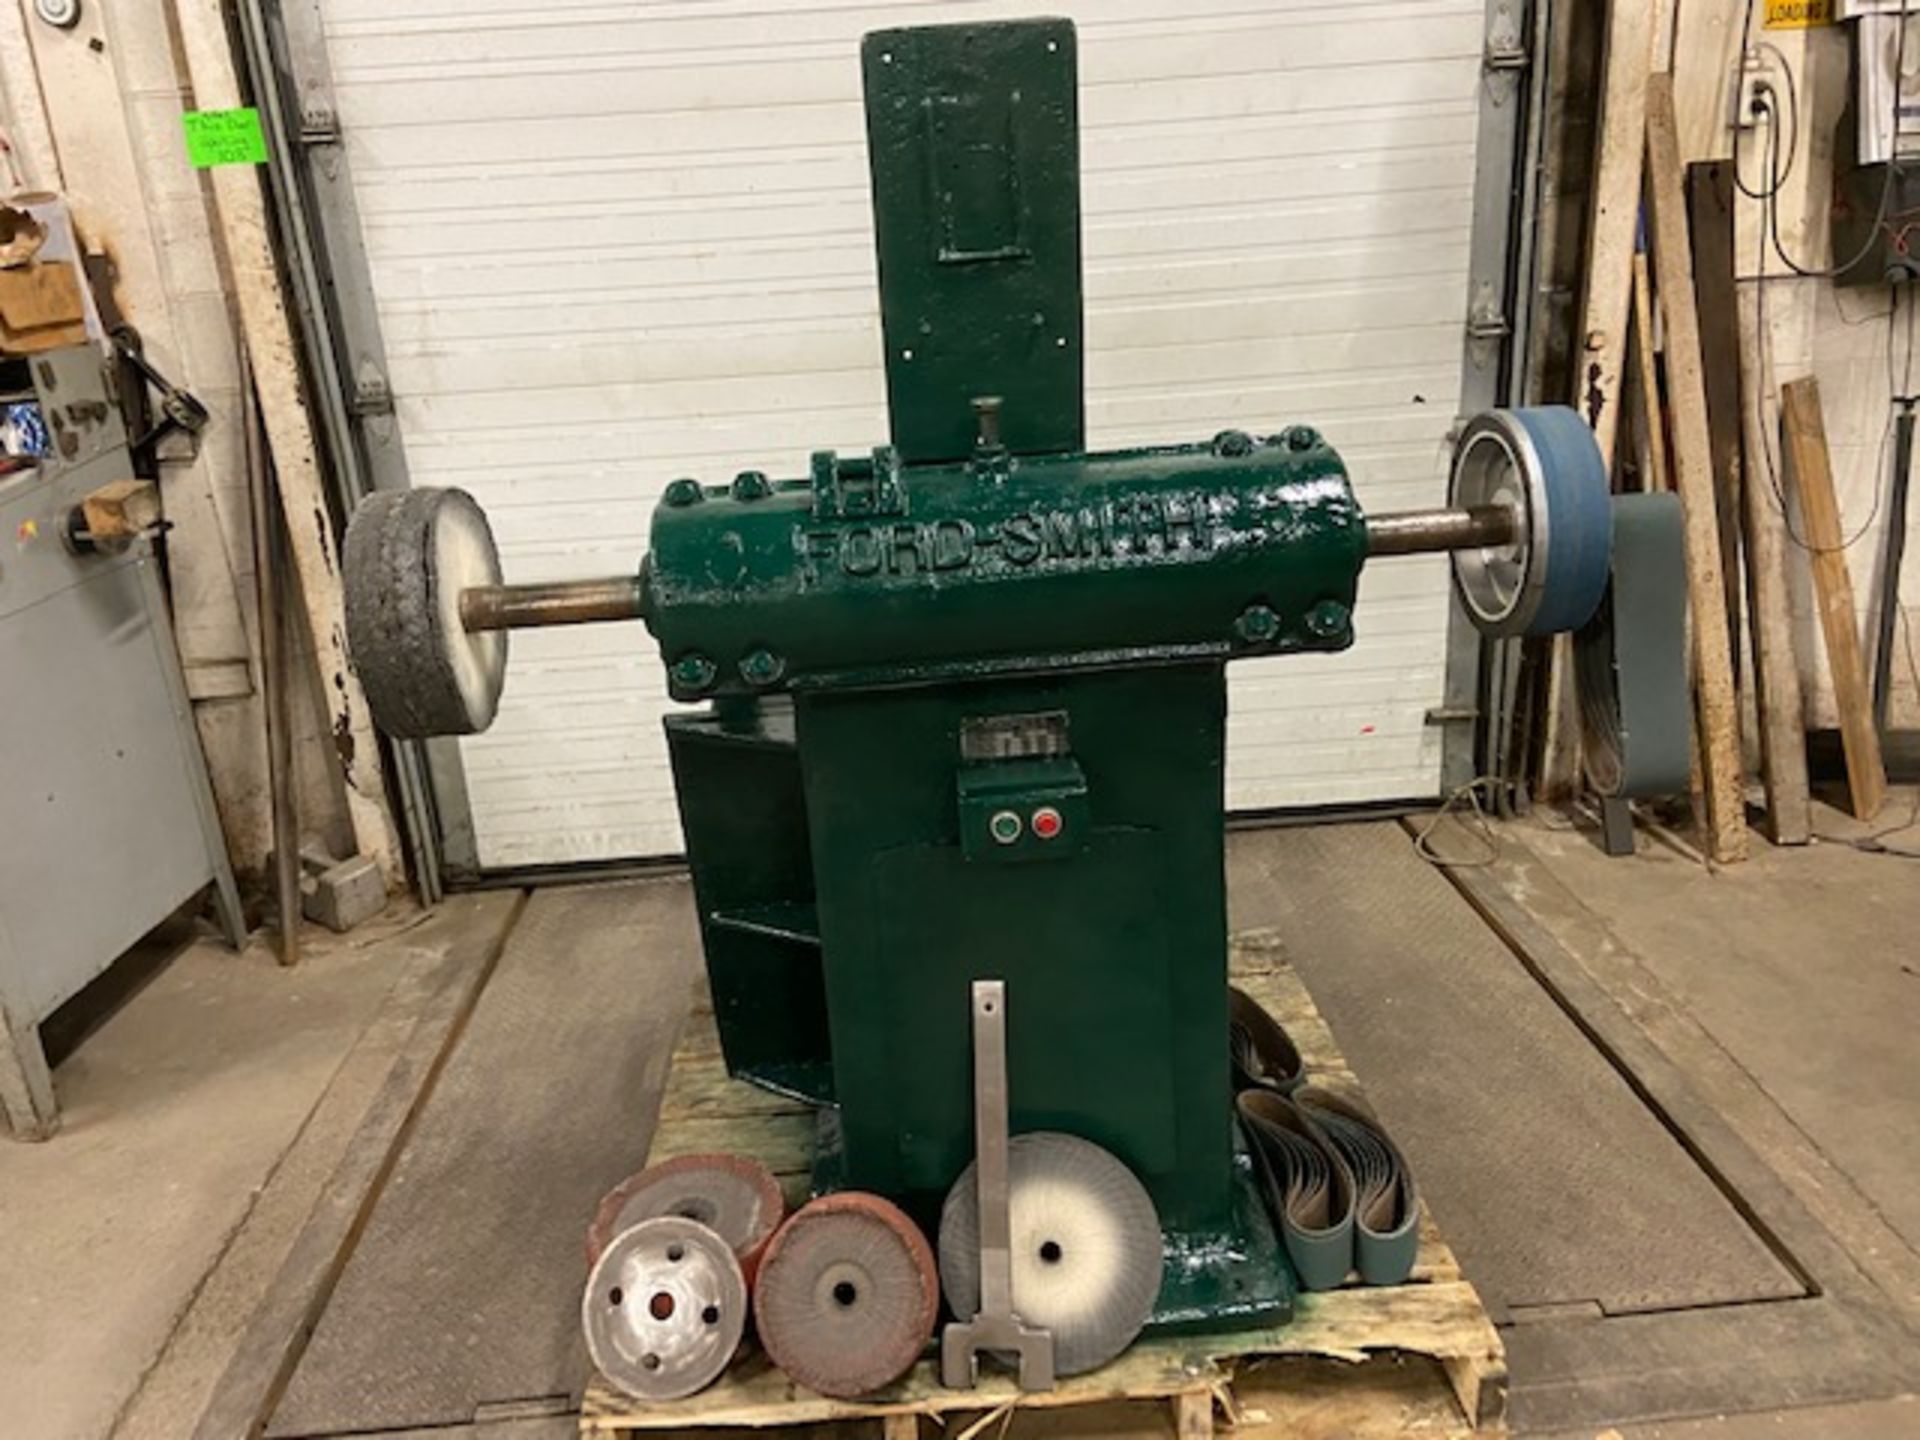 Ford Smith Buffer Polisher Sander Unit with Spare parts - 4' wide unit MINT